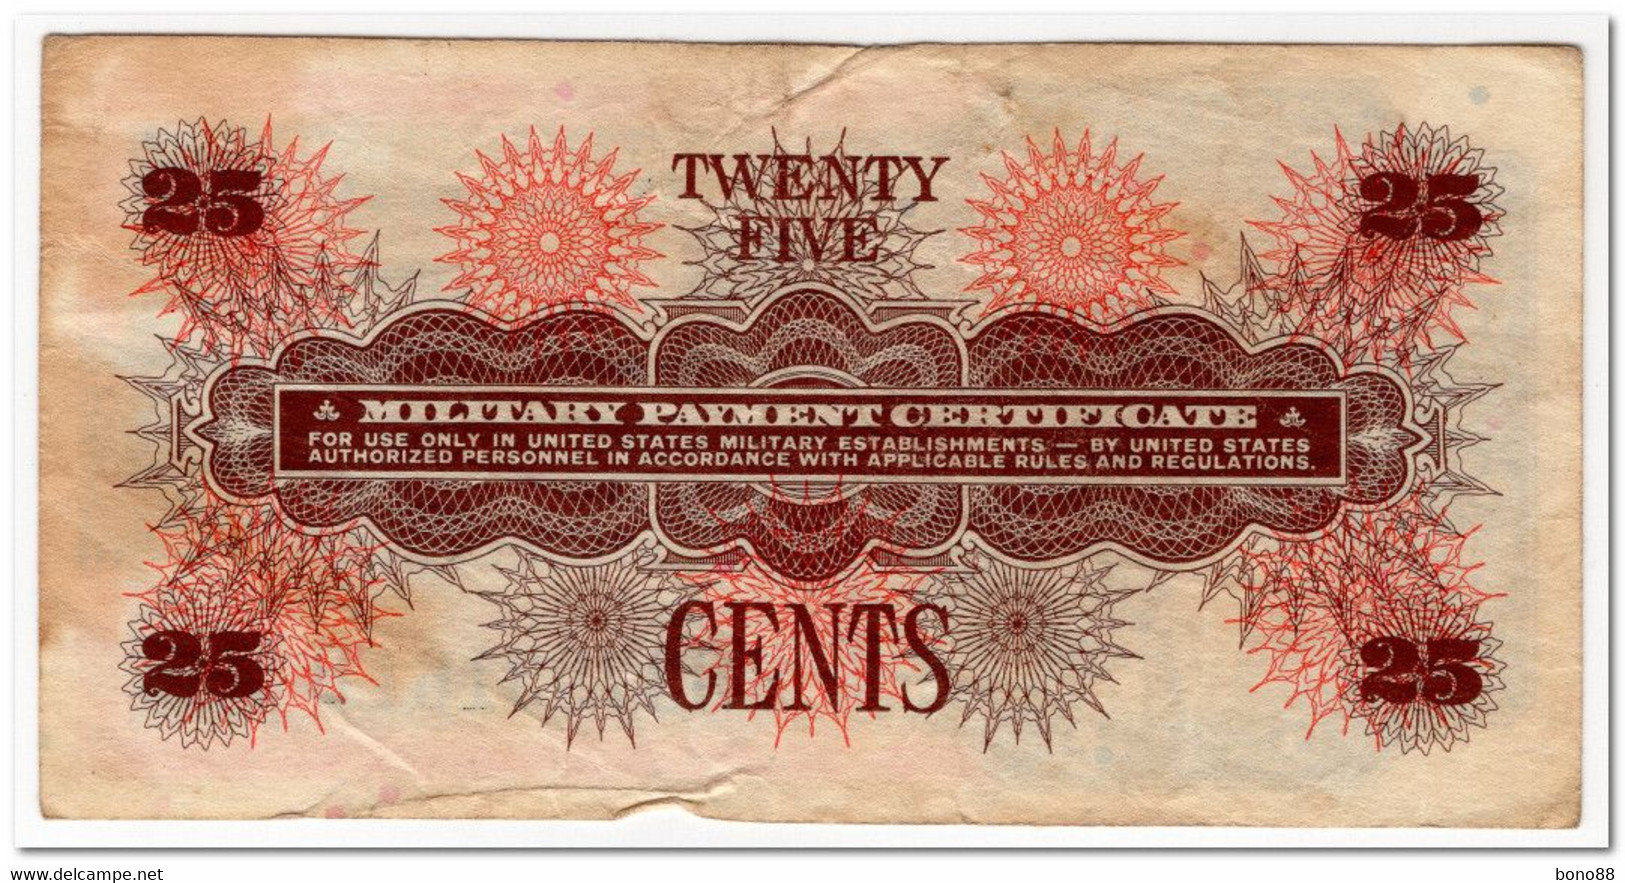 UNITED STATES,MILITARY PAYMENT CERTIFICATE,25 CENTS,1968,M66,MICRO TEAR,F-VF - 1968-1969 - Reeksen 661